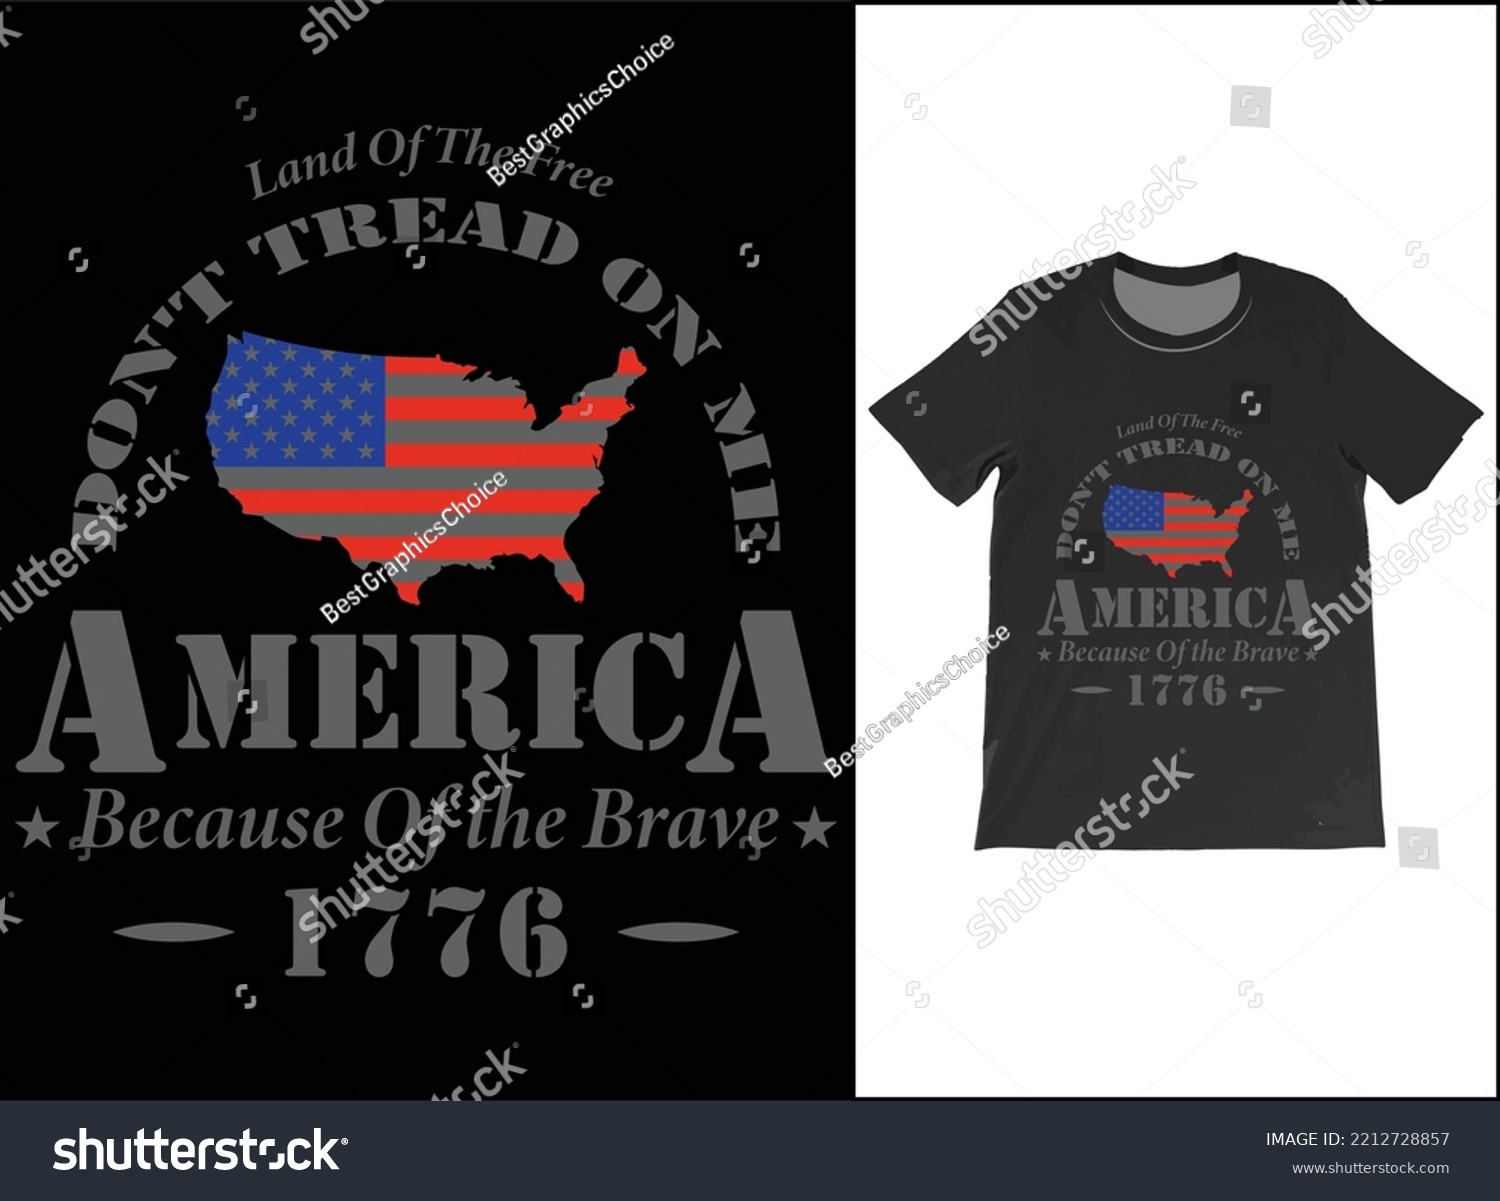 SVG of Land Of The Free Don't Tread On Me America Because Of the Brave 1776, 4th of July Shirt. svg